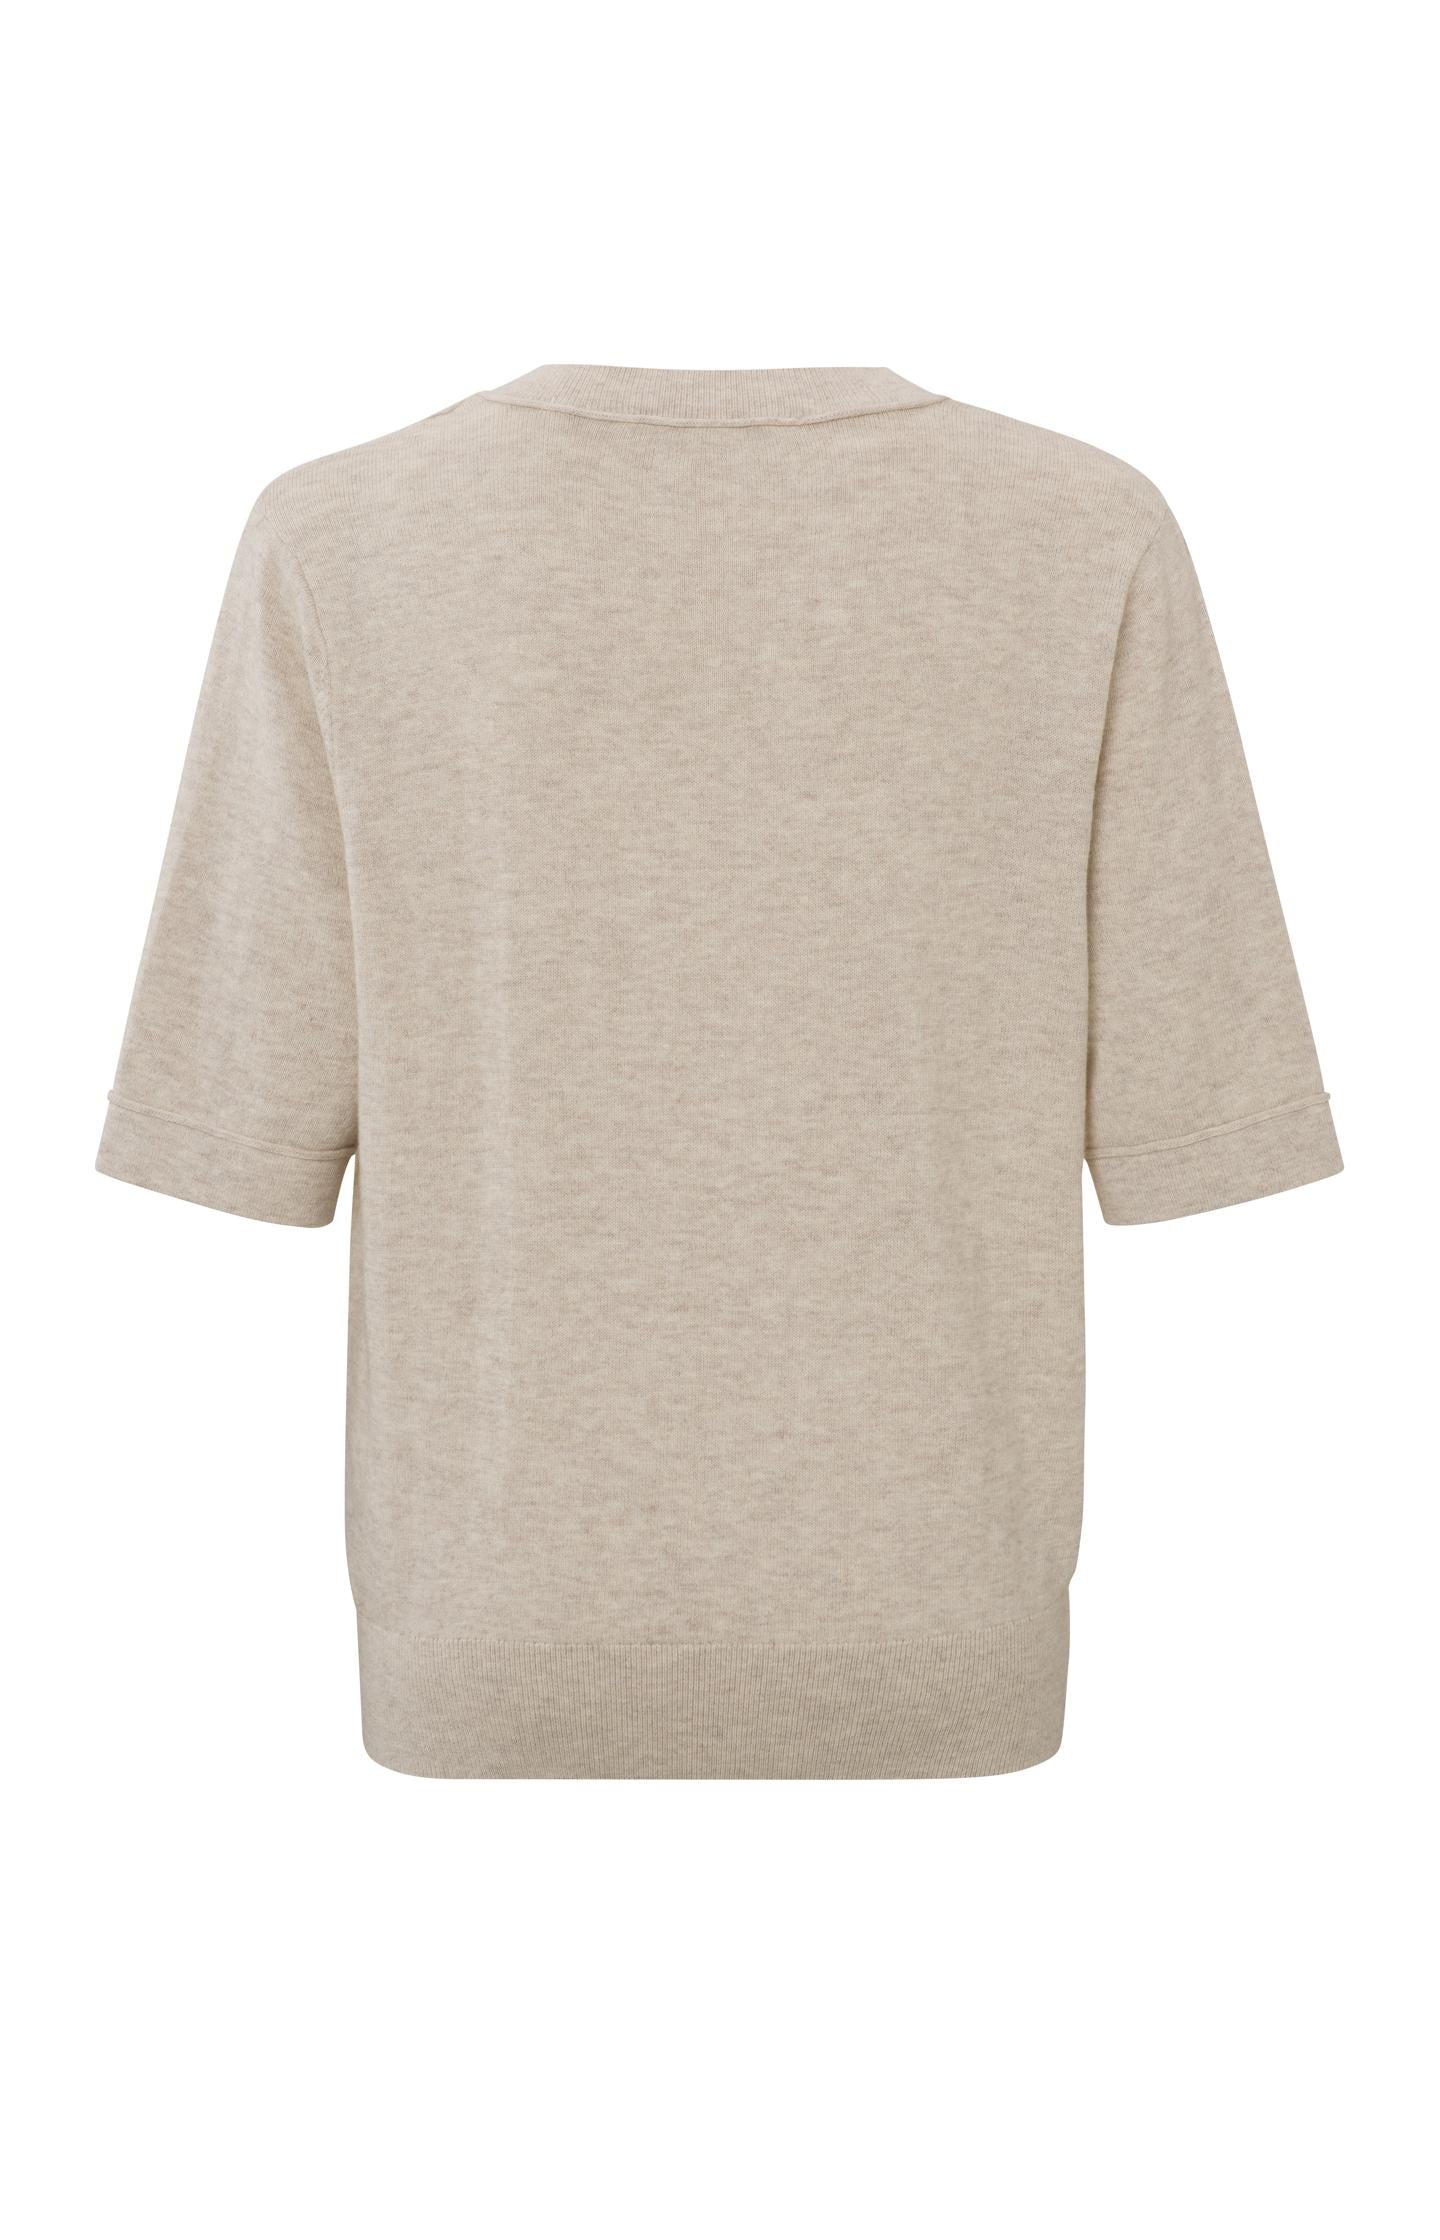 Sweater with V-neck, mid-length sleeves and seam details